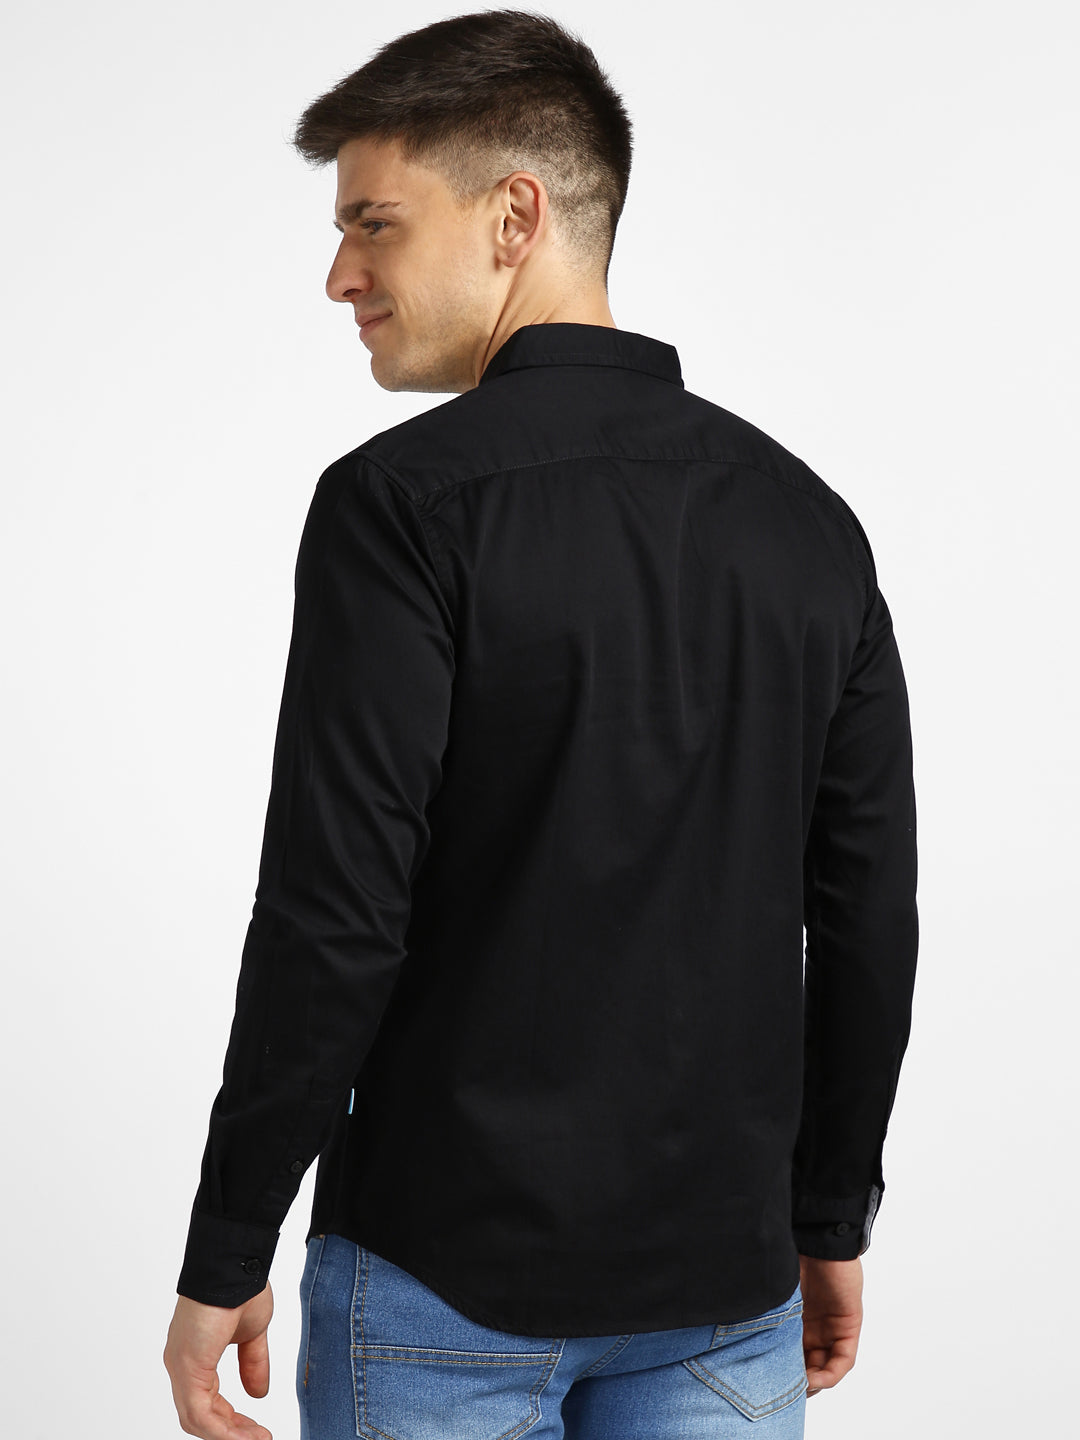 Men's Black Cotton Full Sleeve Slim Fit Casual Solid Shirt